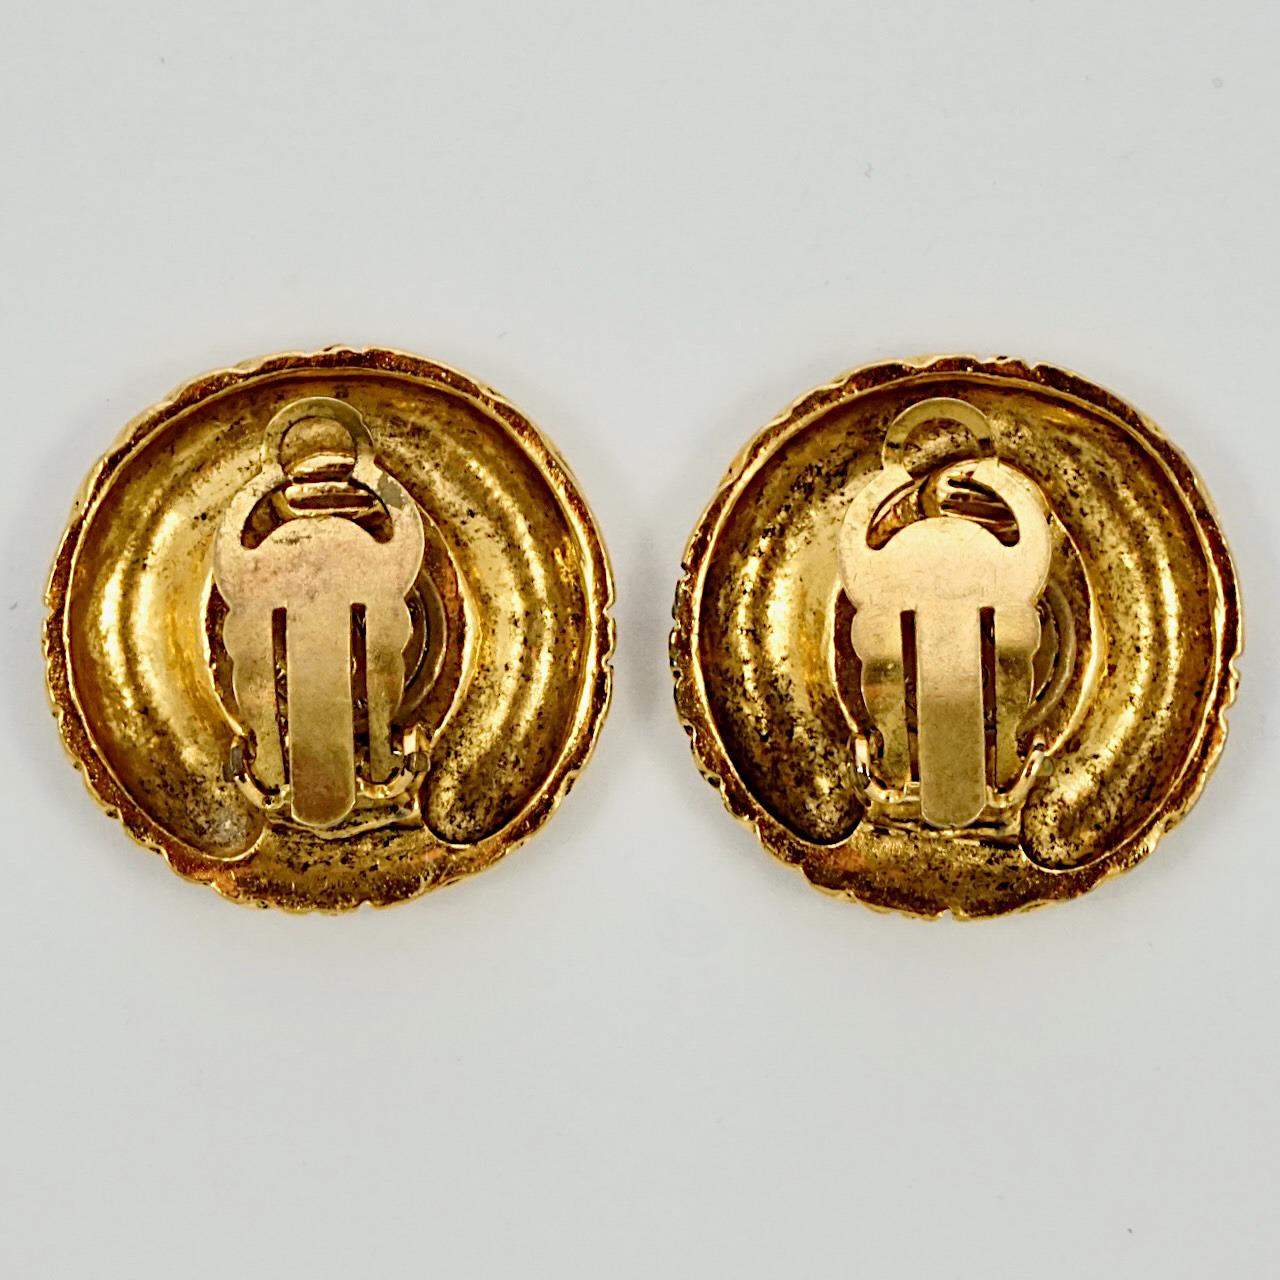 Fabulous Chanel gold plated clip on earrings, featuring the Chanel logo surrounded by a ridged design. Measuring diameter 2.7 cm / 1 inch. There is minor wear to the gold plating.

These beautiful Chanel earrings date to the 1970s.
